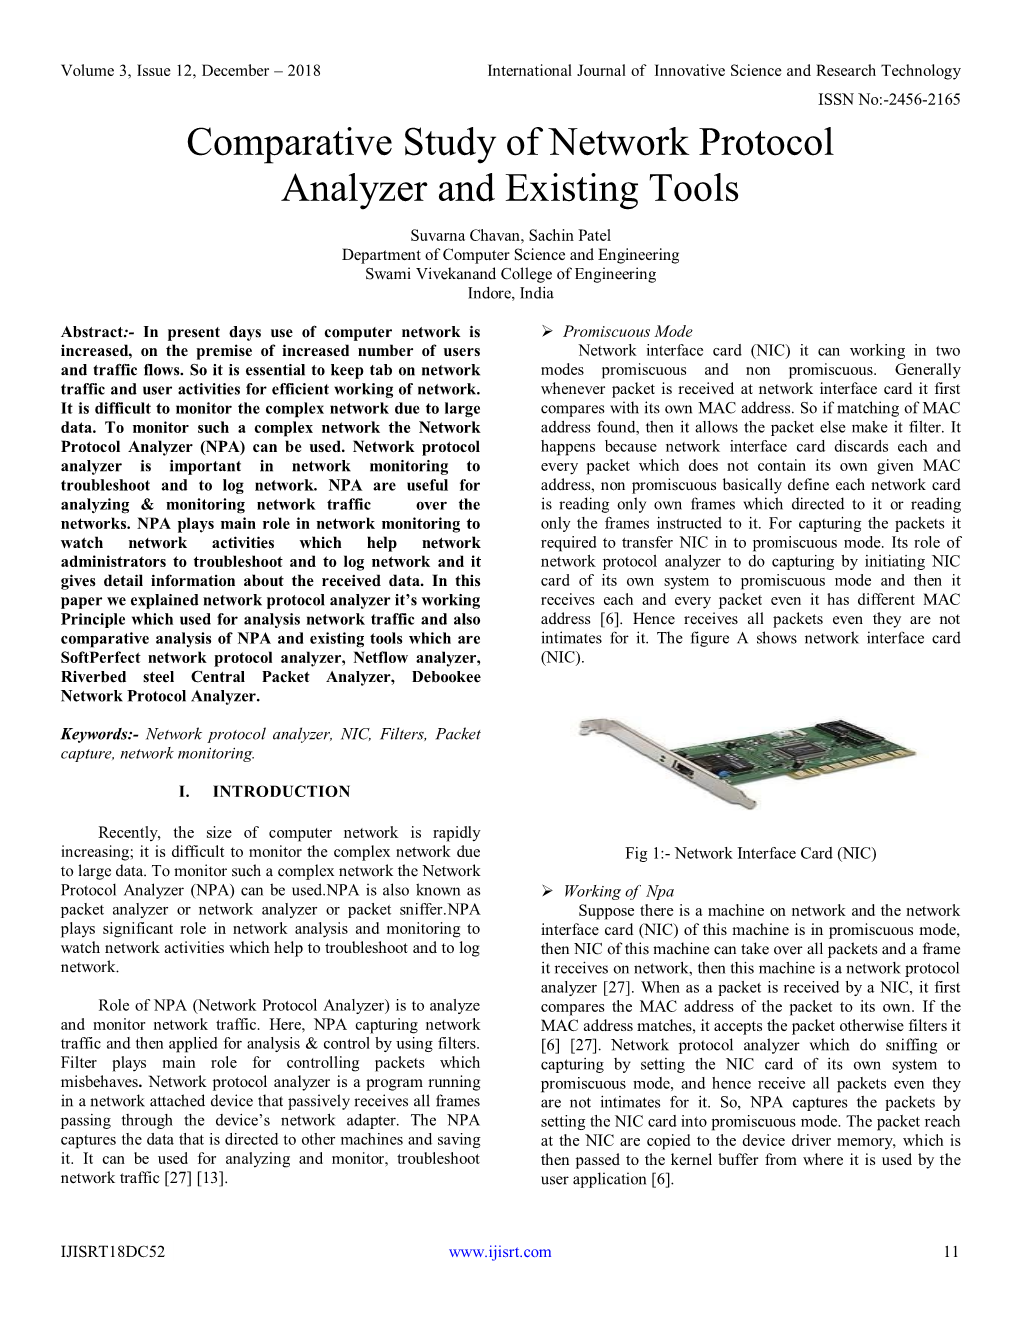 Comparative Study of Network Protocol Analyzer and Existing Tools